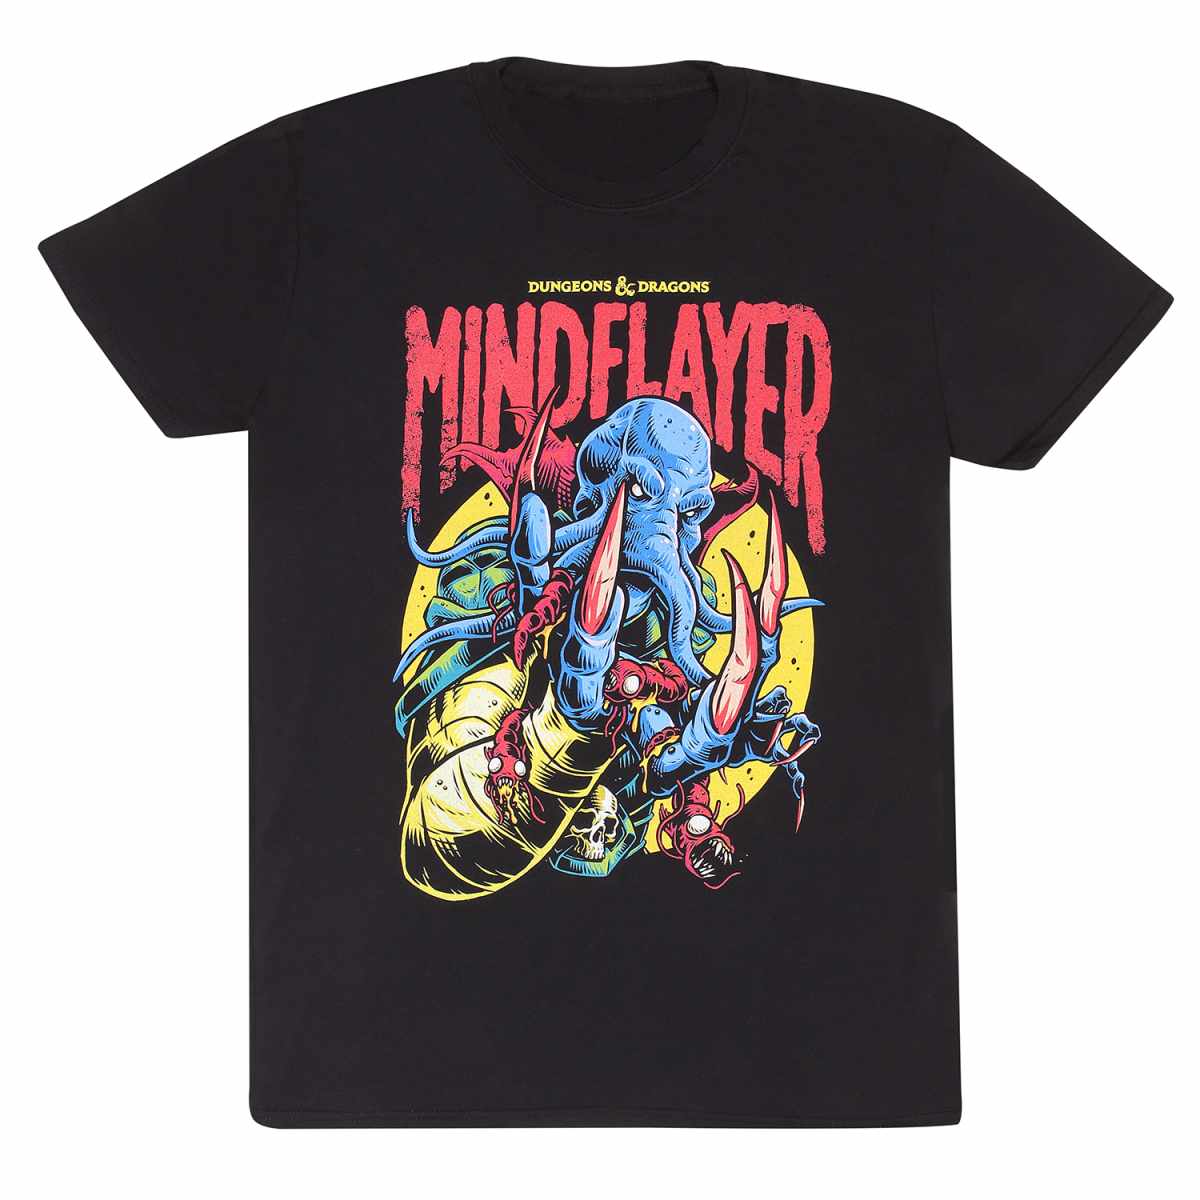 Dungeons & Dragons - Tee-shirt Mindflayer color pop (M)